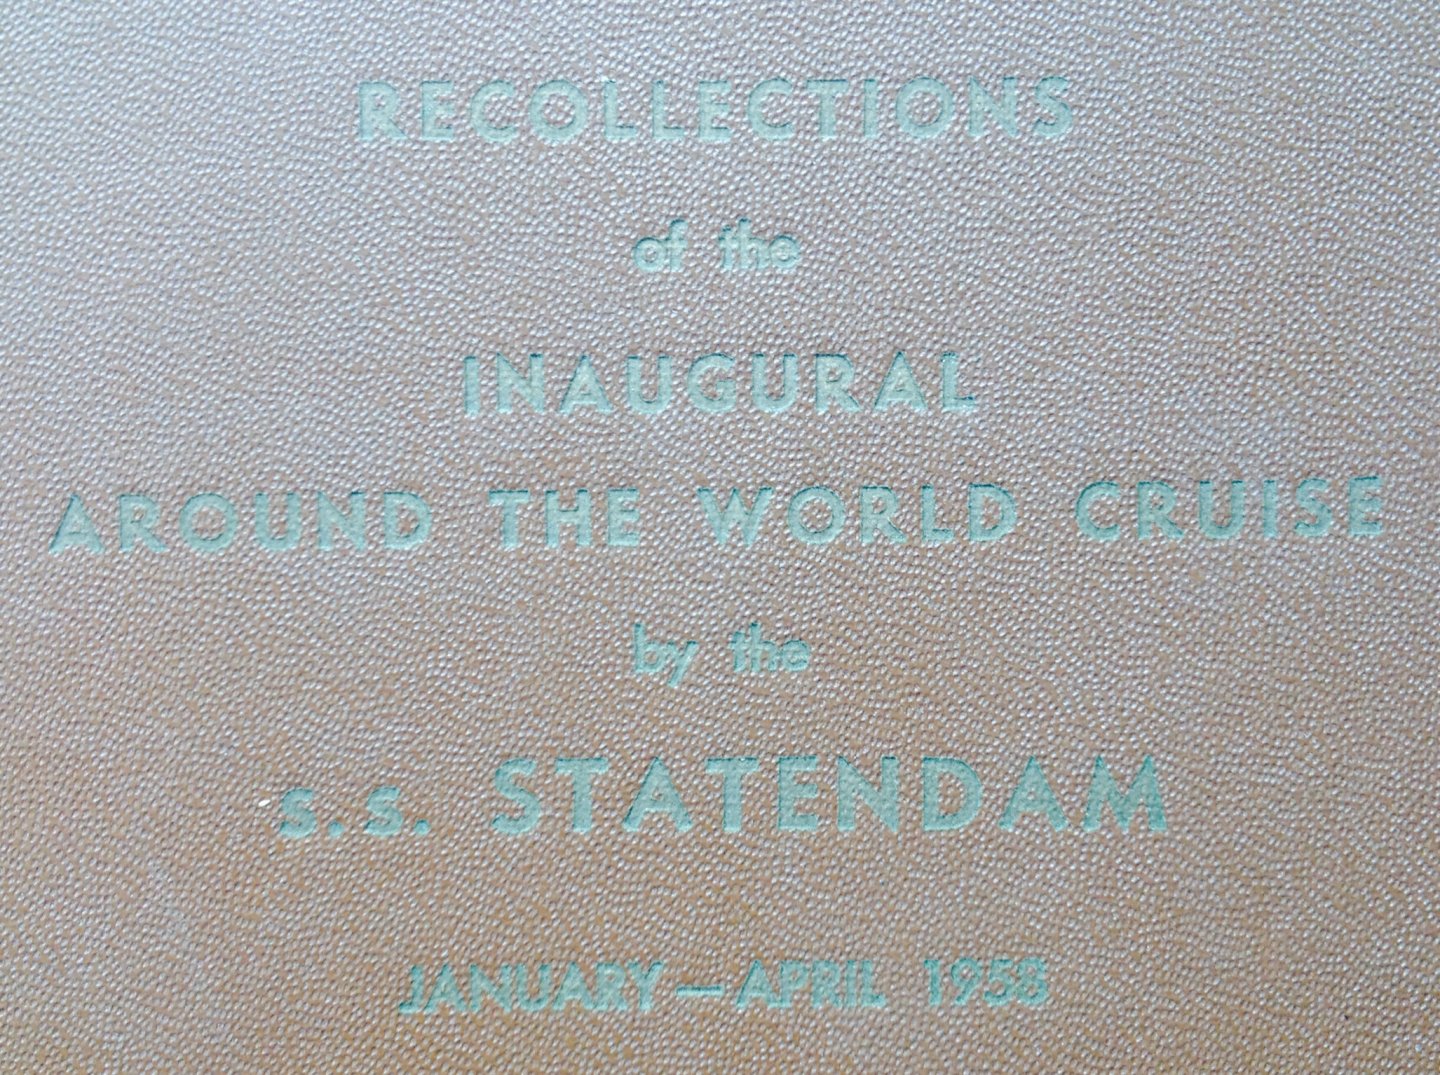 Holland America Line - Recollections of the Inaugural Around the World Cruise by the s.s. Statendam January-April 1958.